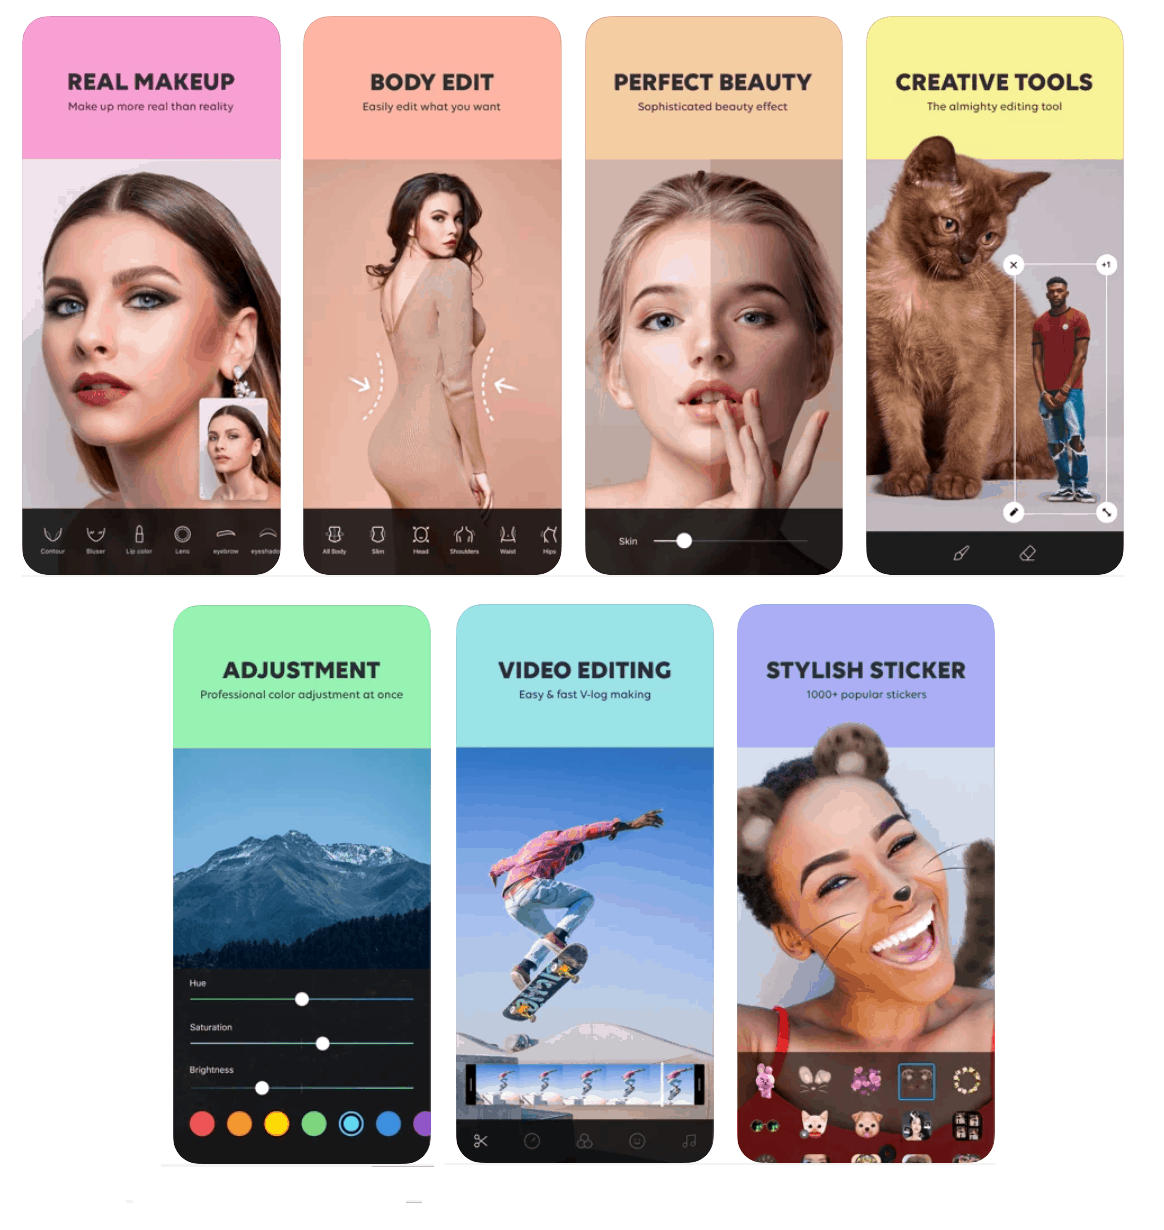 instagram tools - Top 10 Mobile-Editing Instagram Tools To Create Killer Images - 2